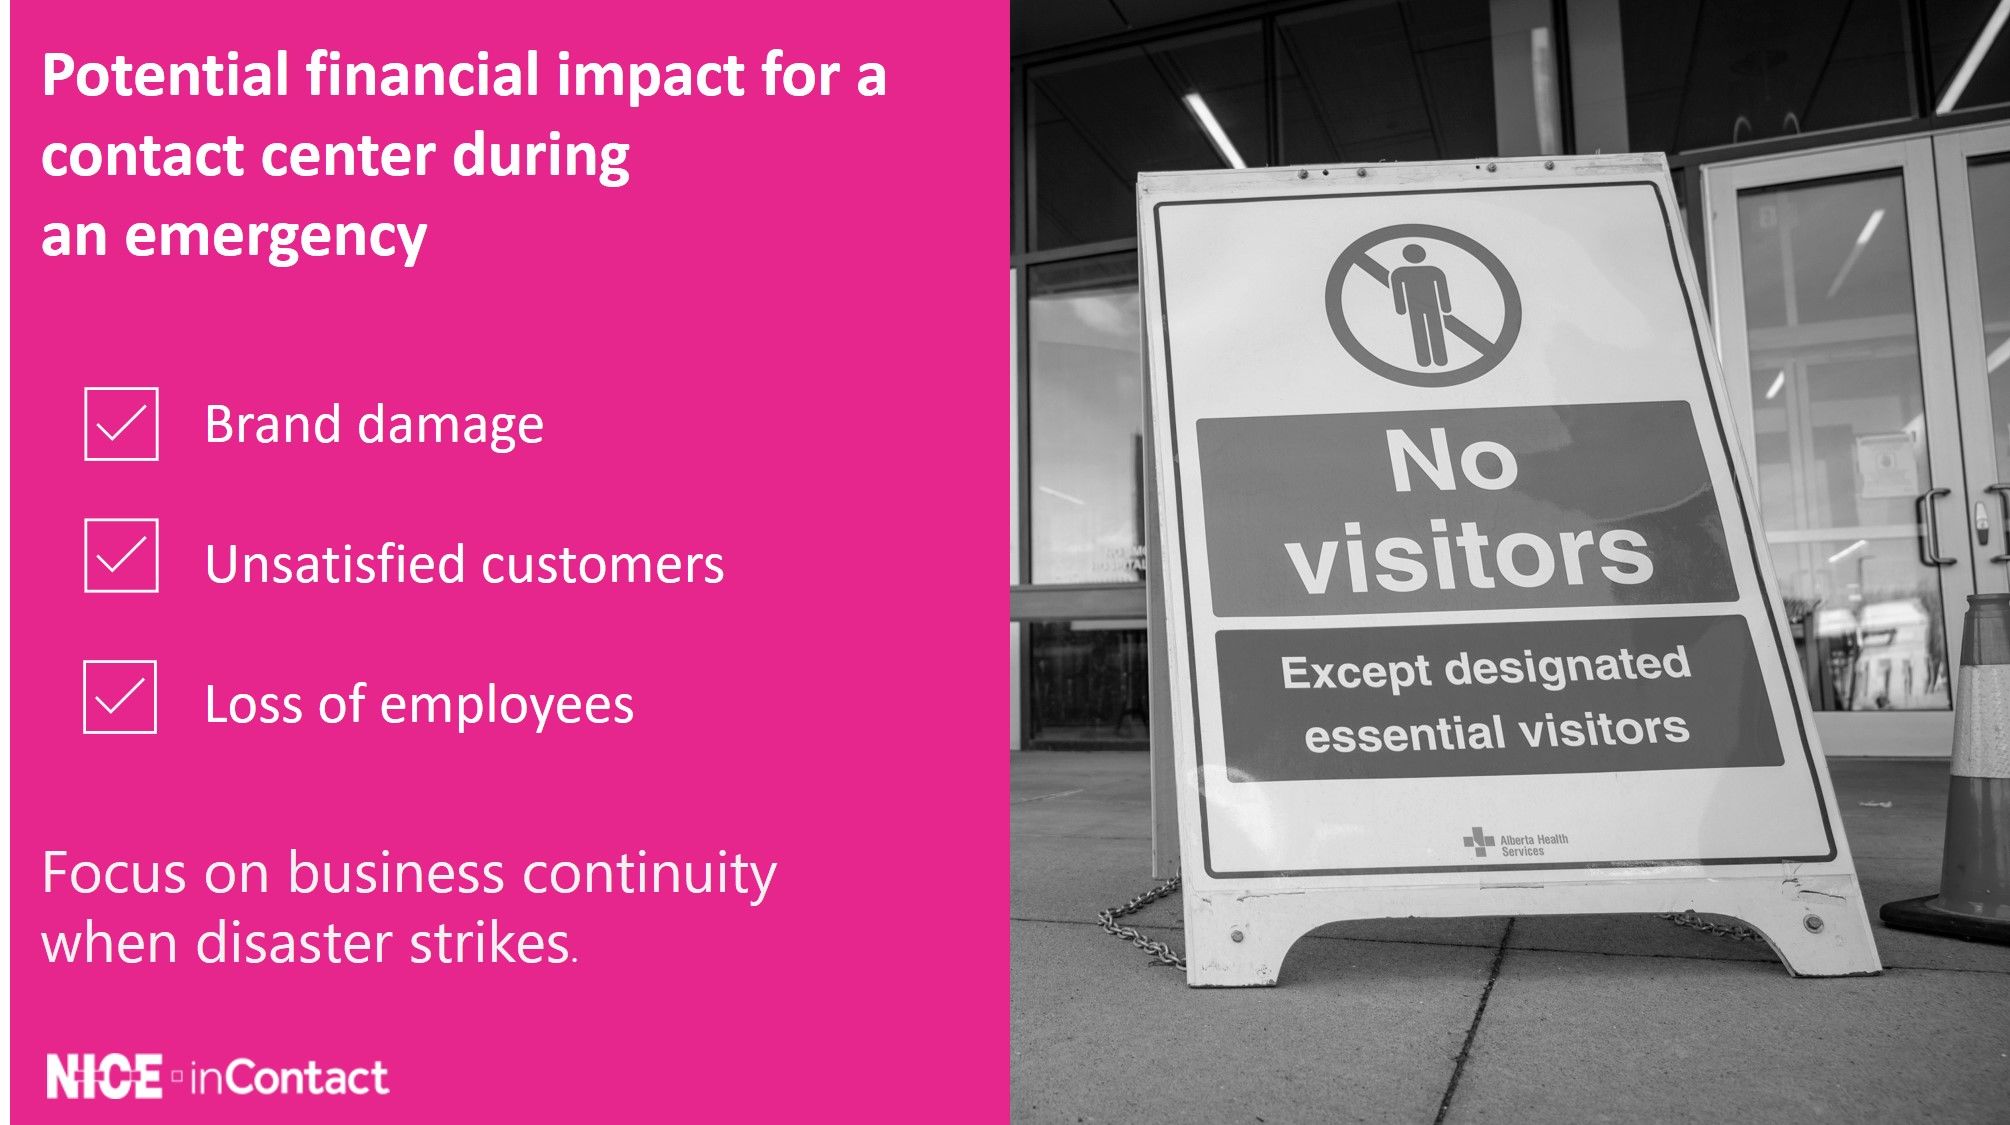 No visitors sign in front of business and tips on potential financial impact during an emergency 